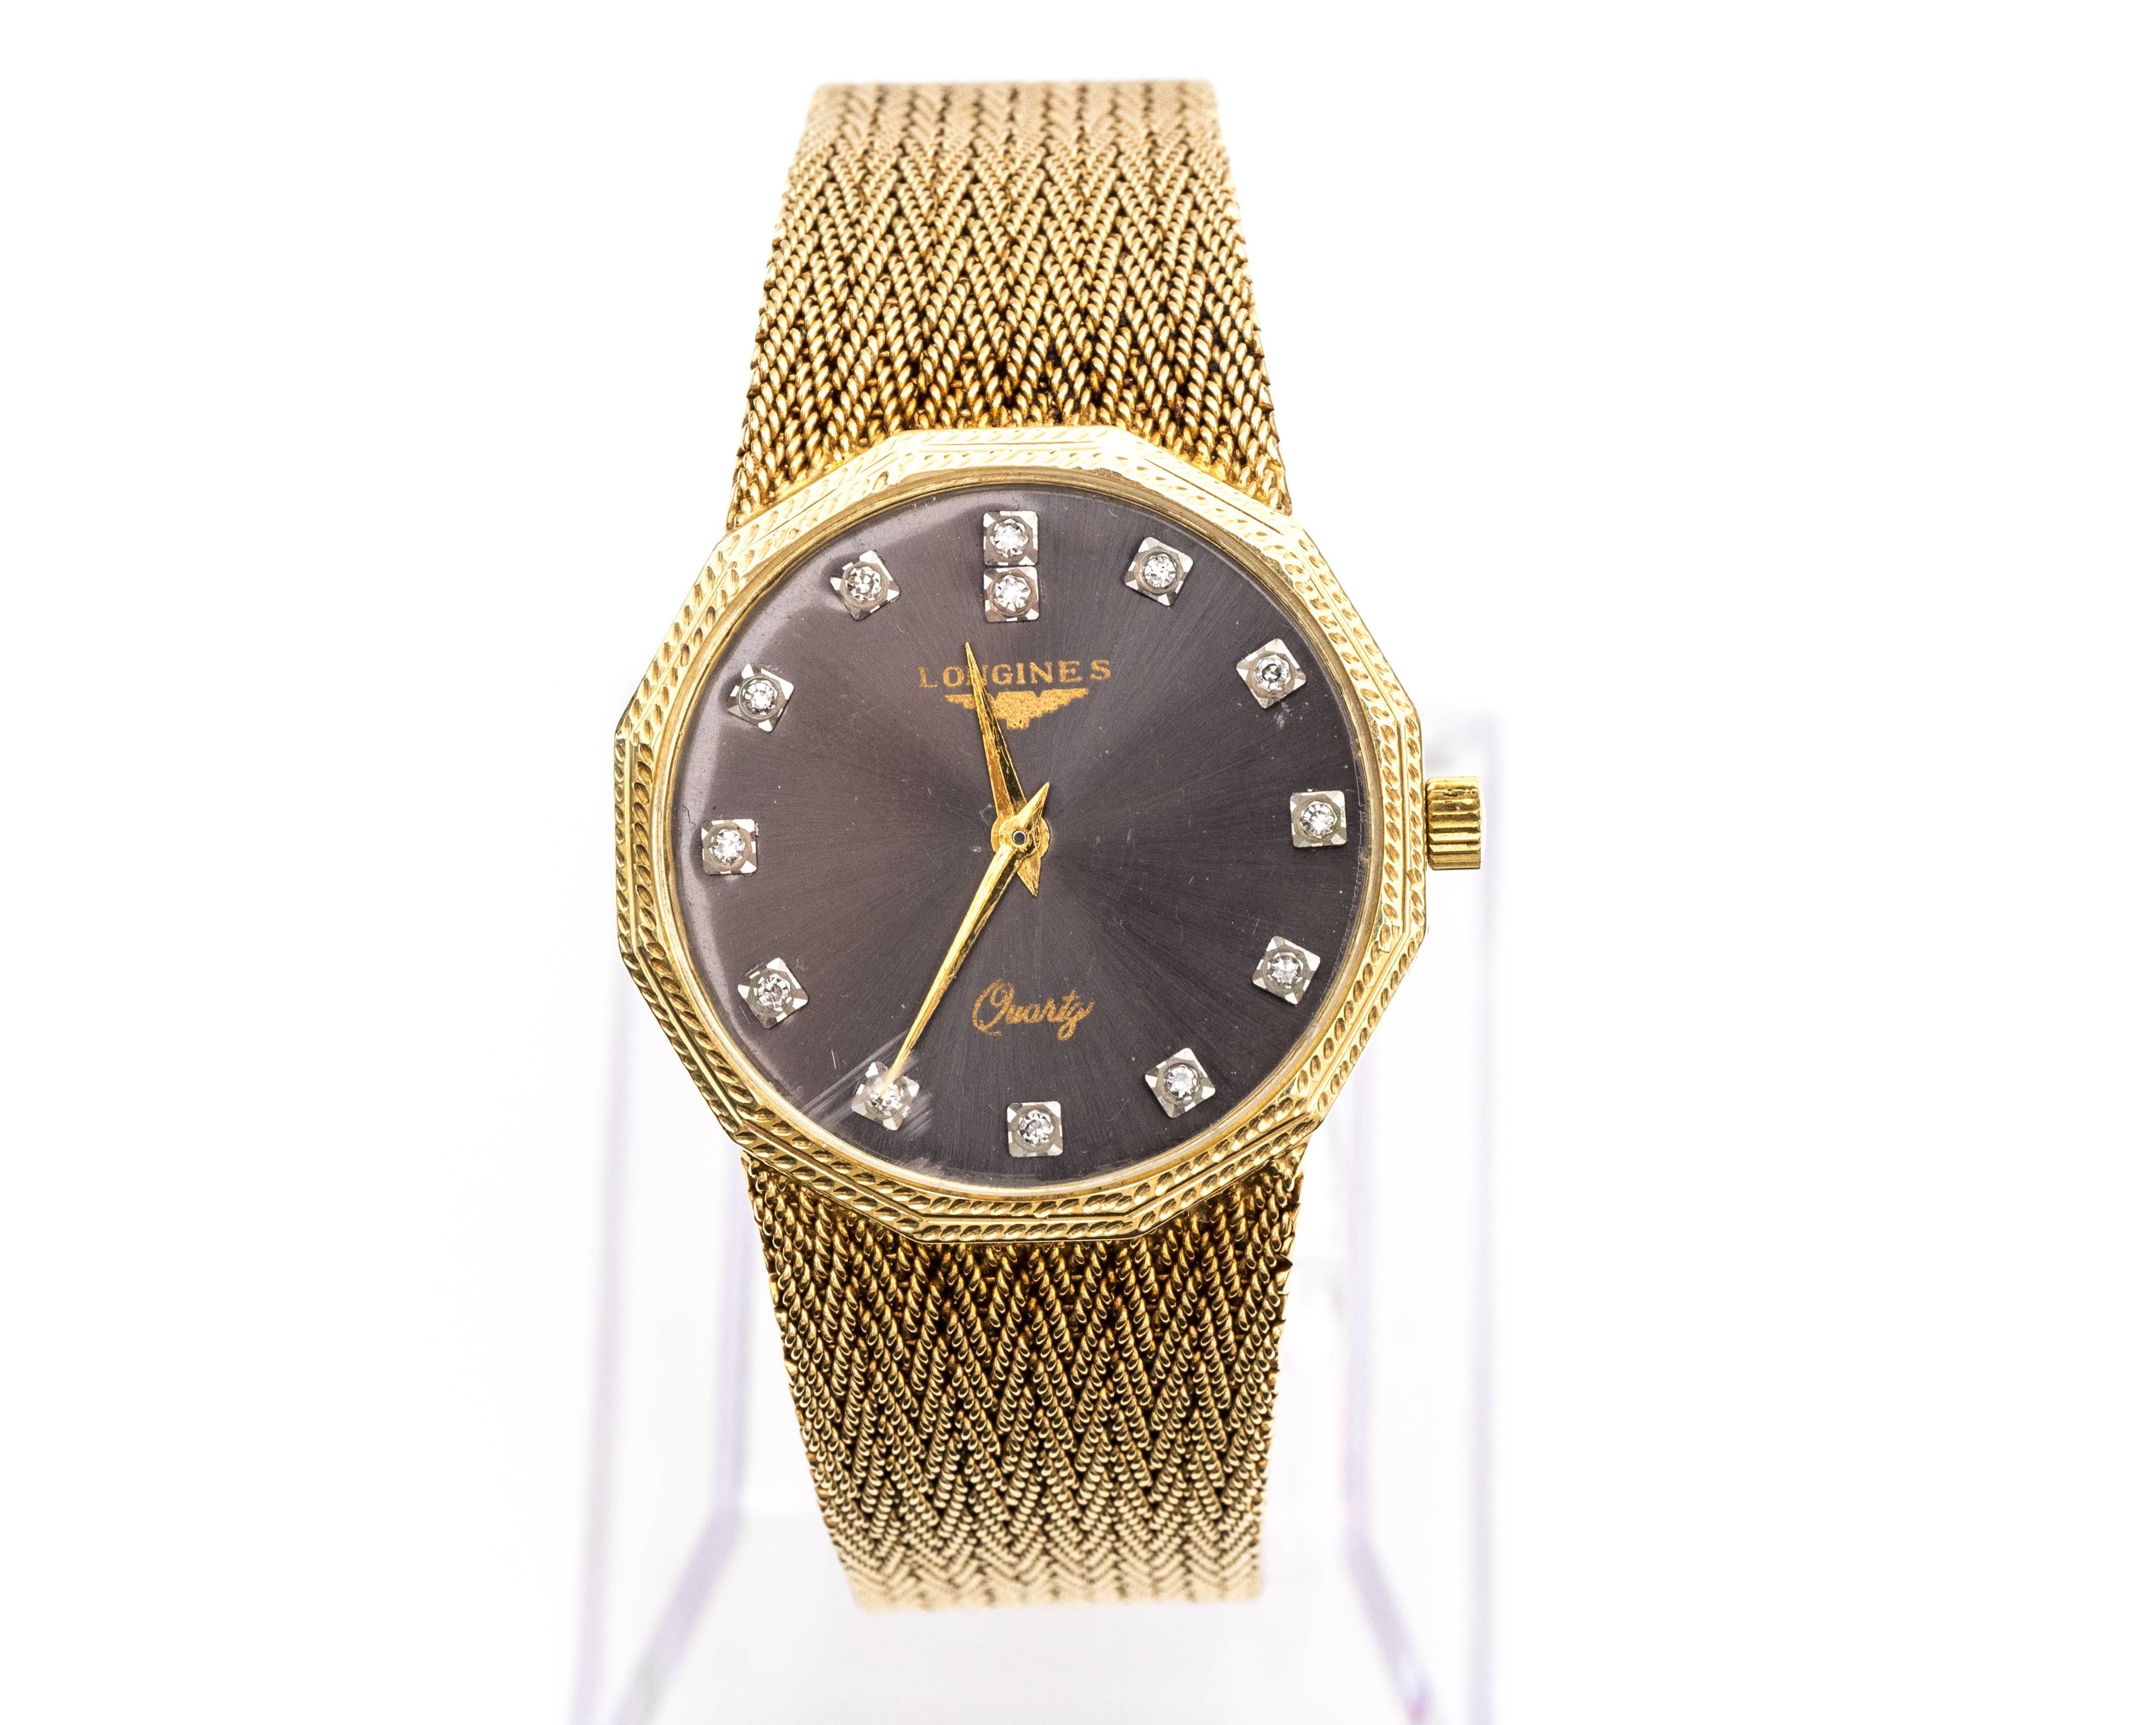 Beautiful 1960s Longines Designer Quartz Wristwatch
Crated in 14 Karat Yellow Gold
Charcoal Grey Dial with Diamond Markers
Crystal has a slight rash at 7 p.m. mark. 
Bracelet is Mesh Woven Pattern Crafted in 14 Karat Yellow Gold that is attached at